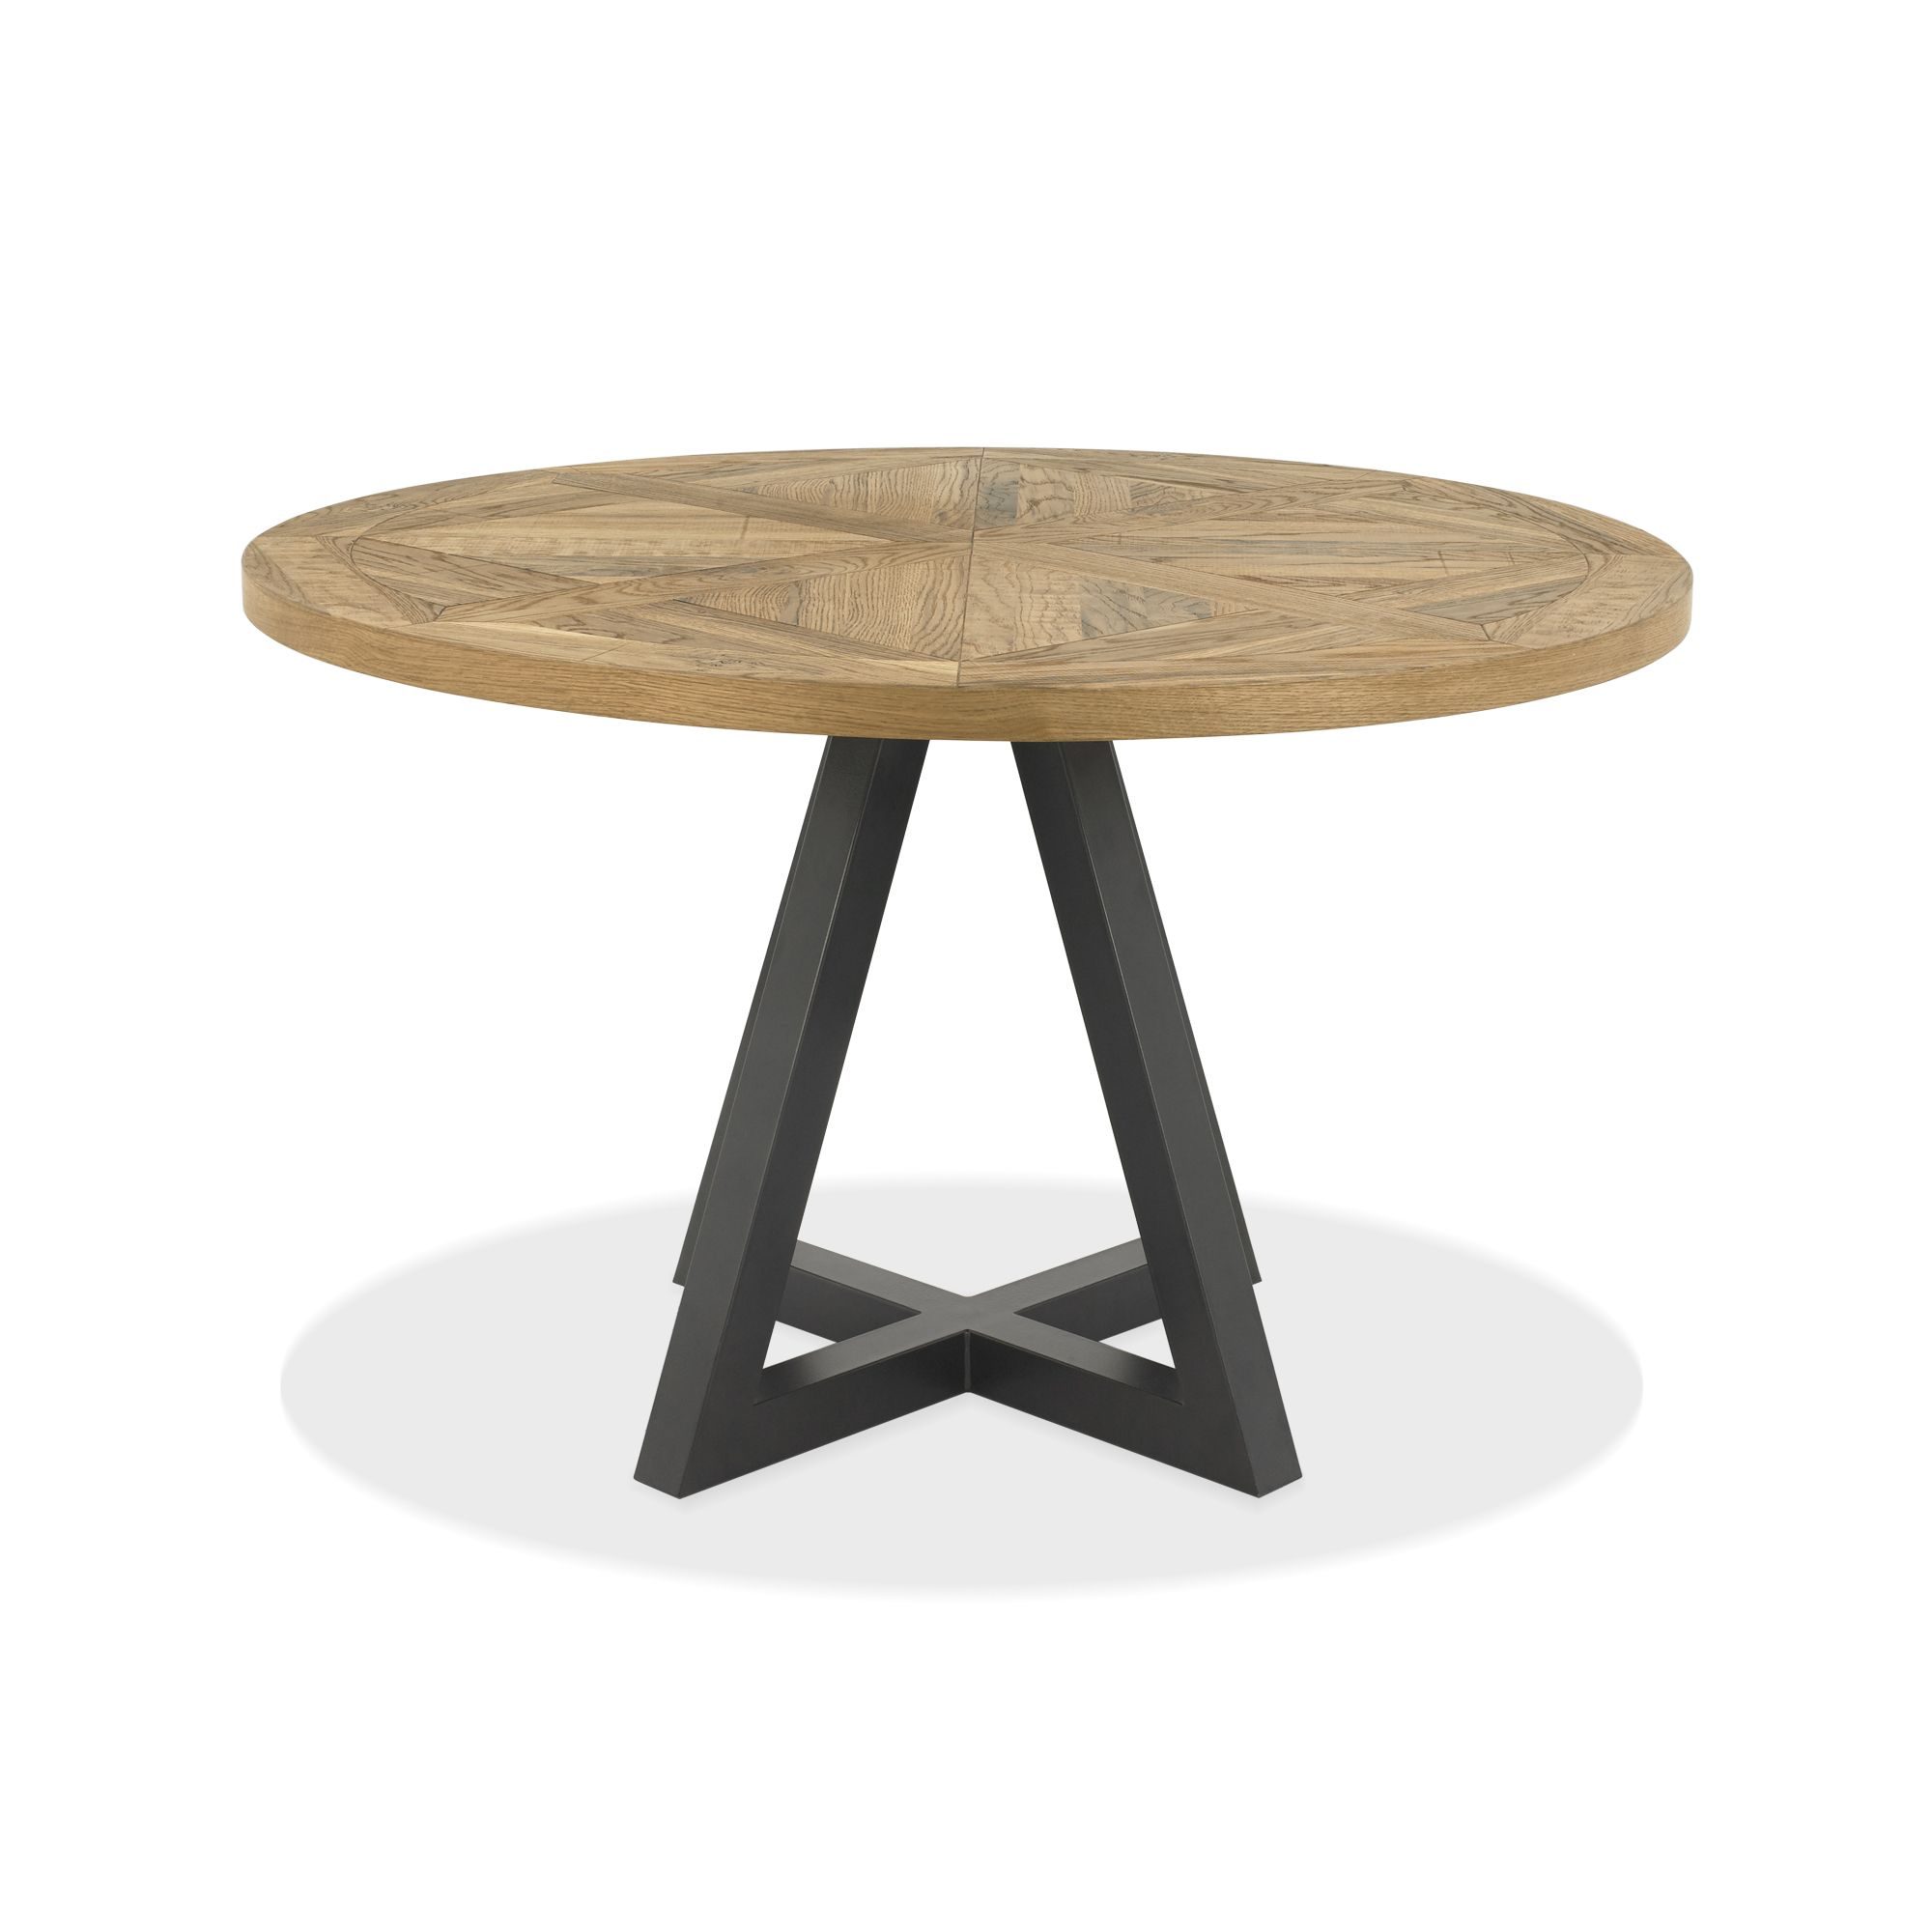 Buy The Indus 4 6 Extending Dining Table Belgica Furniture